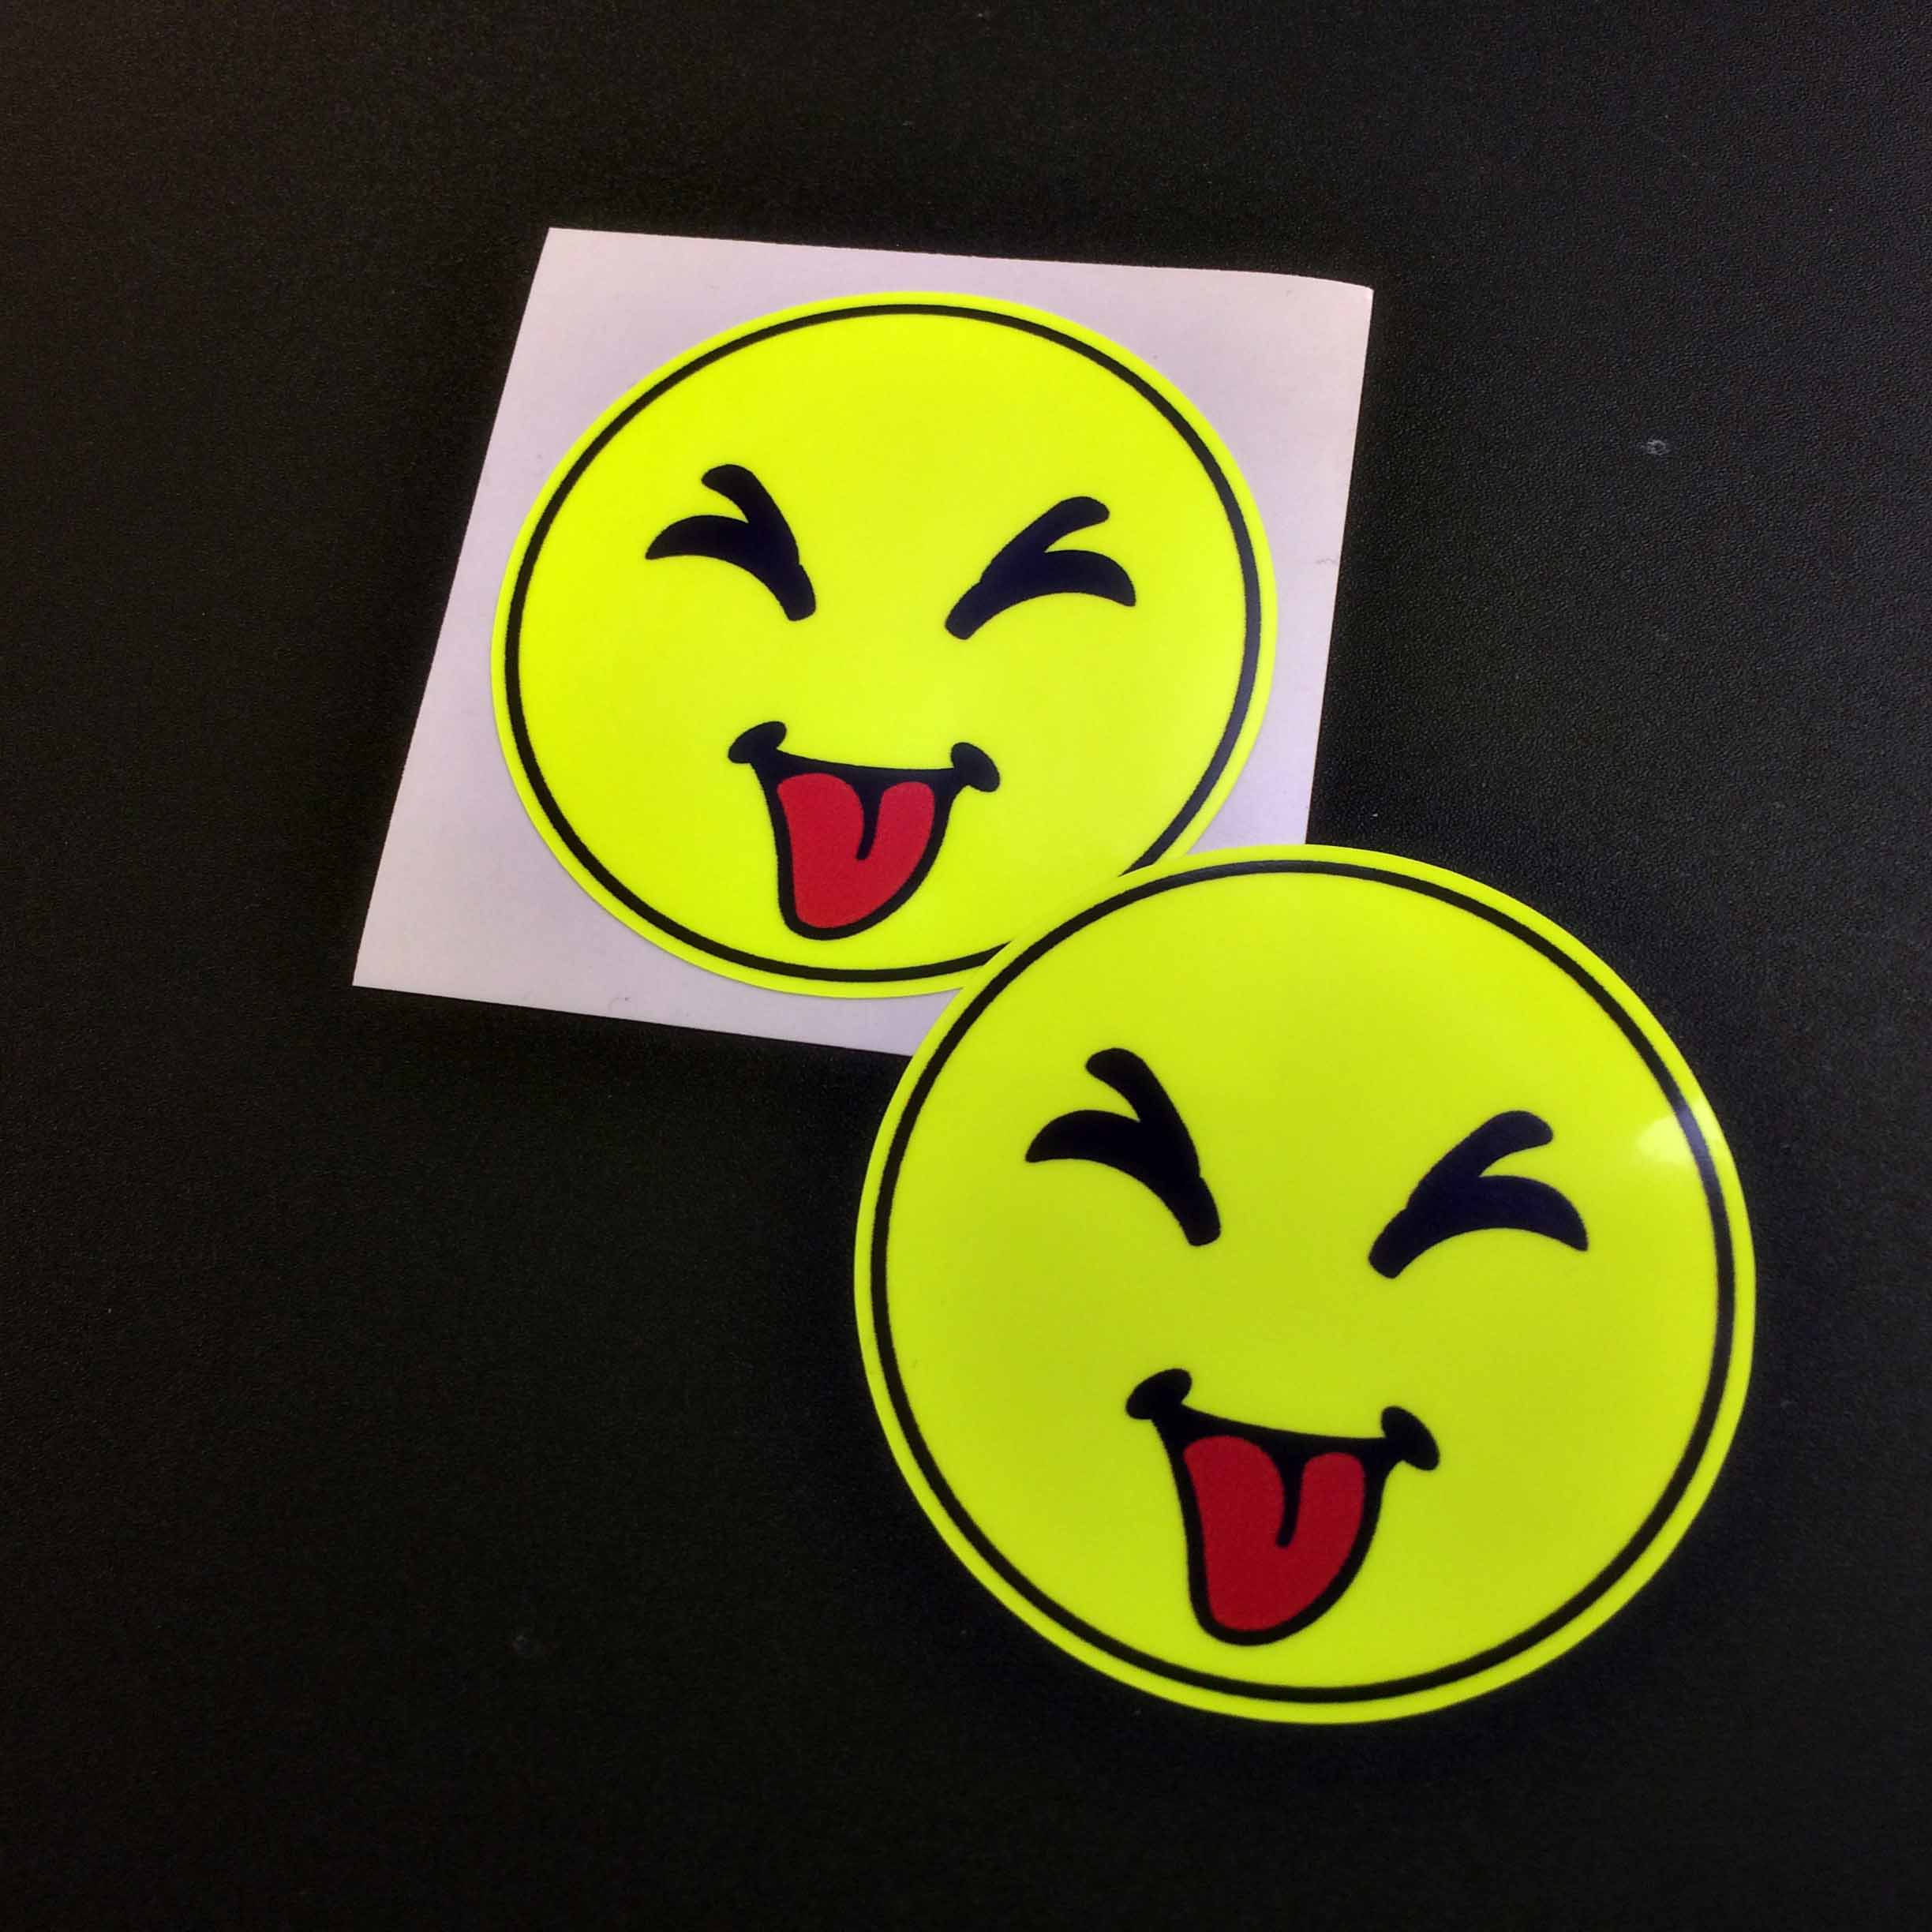 A fluorescent yellow round smiling face. The eyes are closed and the red tongue is hanging out.